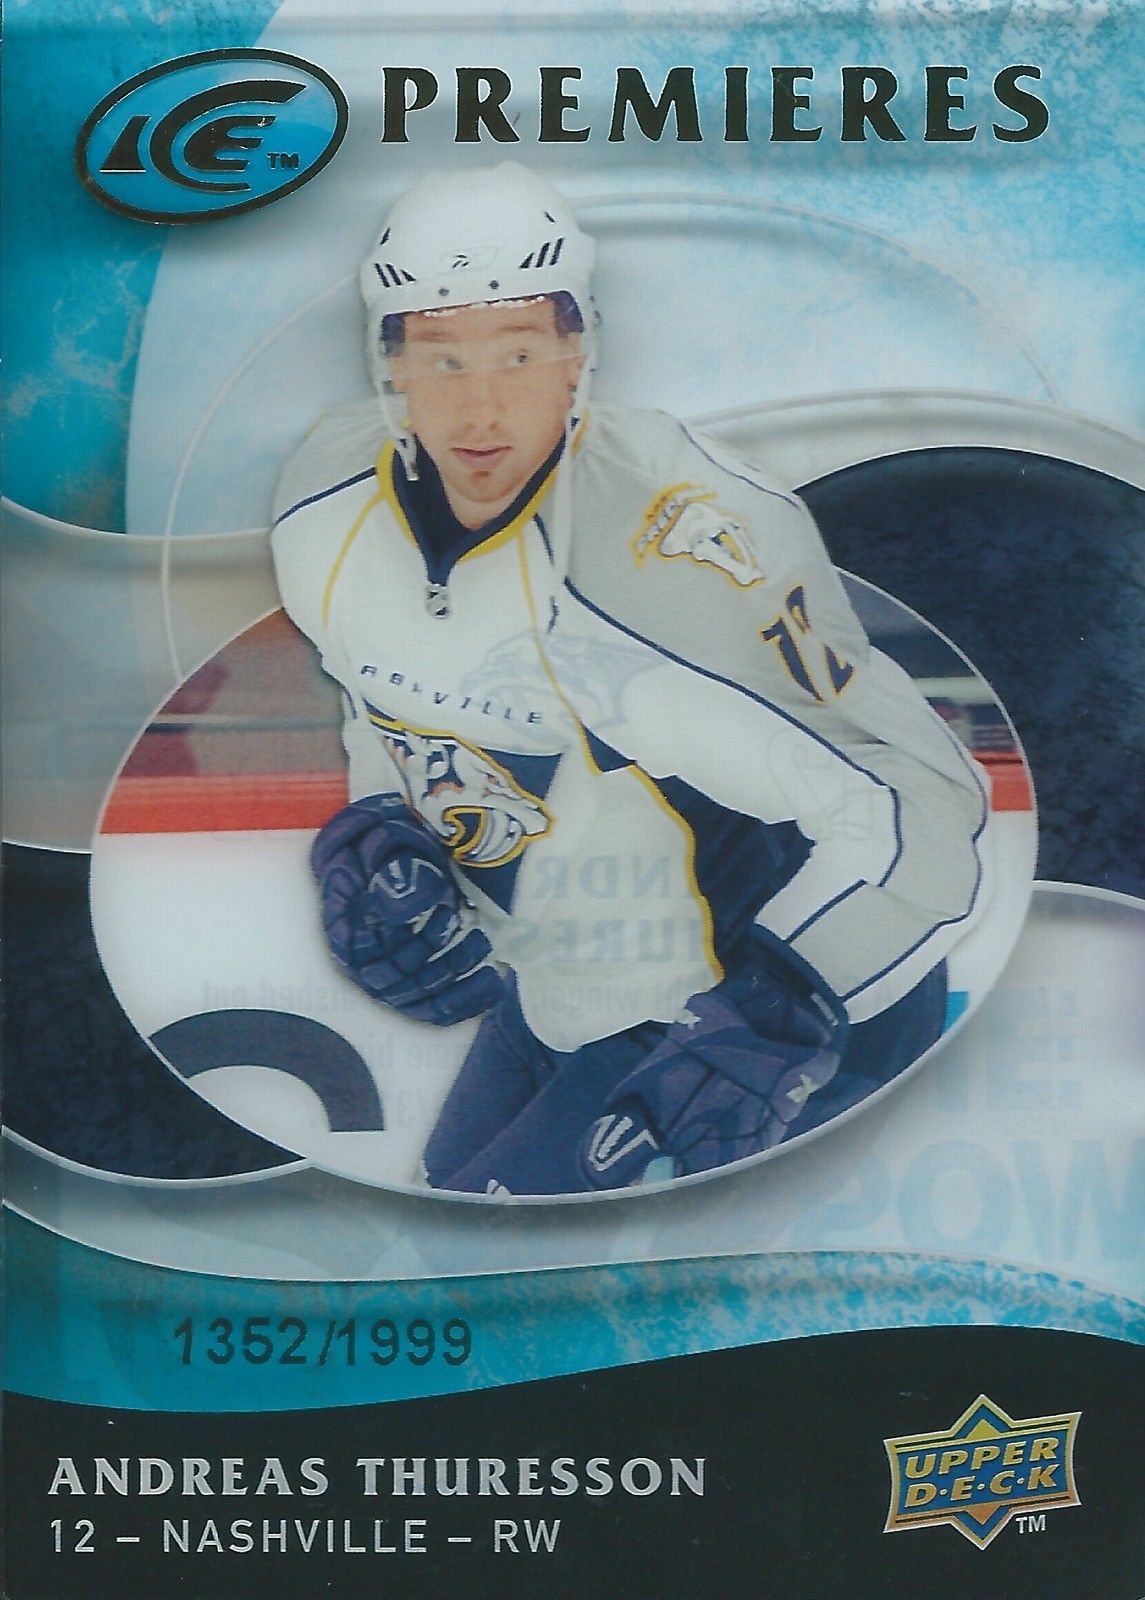  2009-10 UD Ice ANDREAS THURESSON RC #/1999 Ice Premiers UD Rookie 00937 Image 1